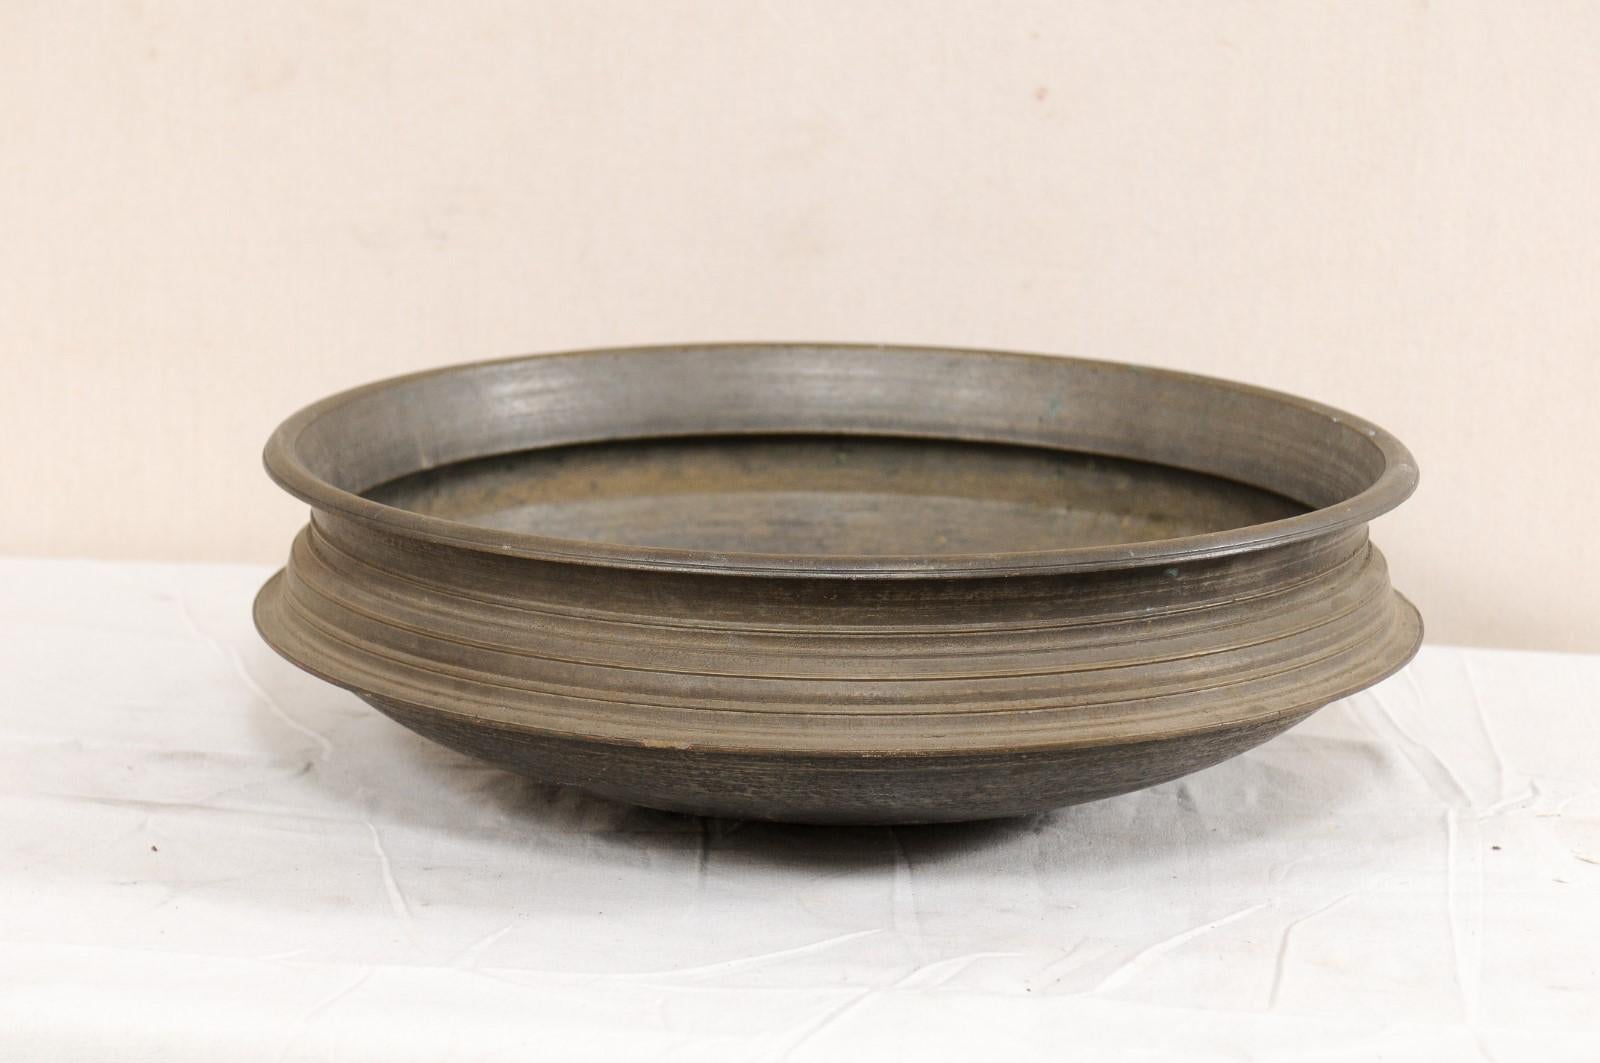 An Uruli vessel from Southern India. This uruli, from the early 20th century, is made of bell metal. Urulis are vessels which are circular in shape and shallow in depth, and were typically used in traditional cookware extensively used in southern